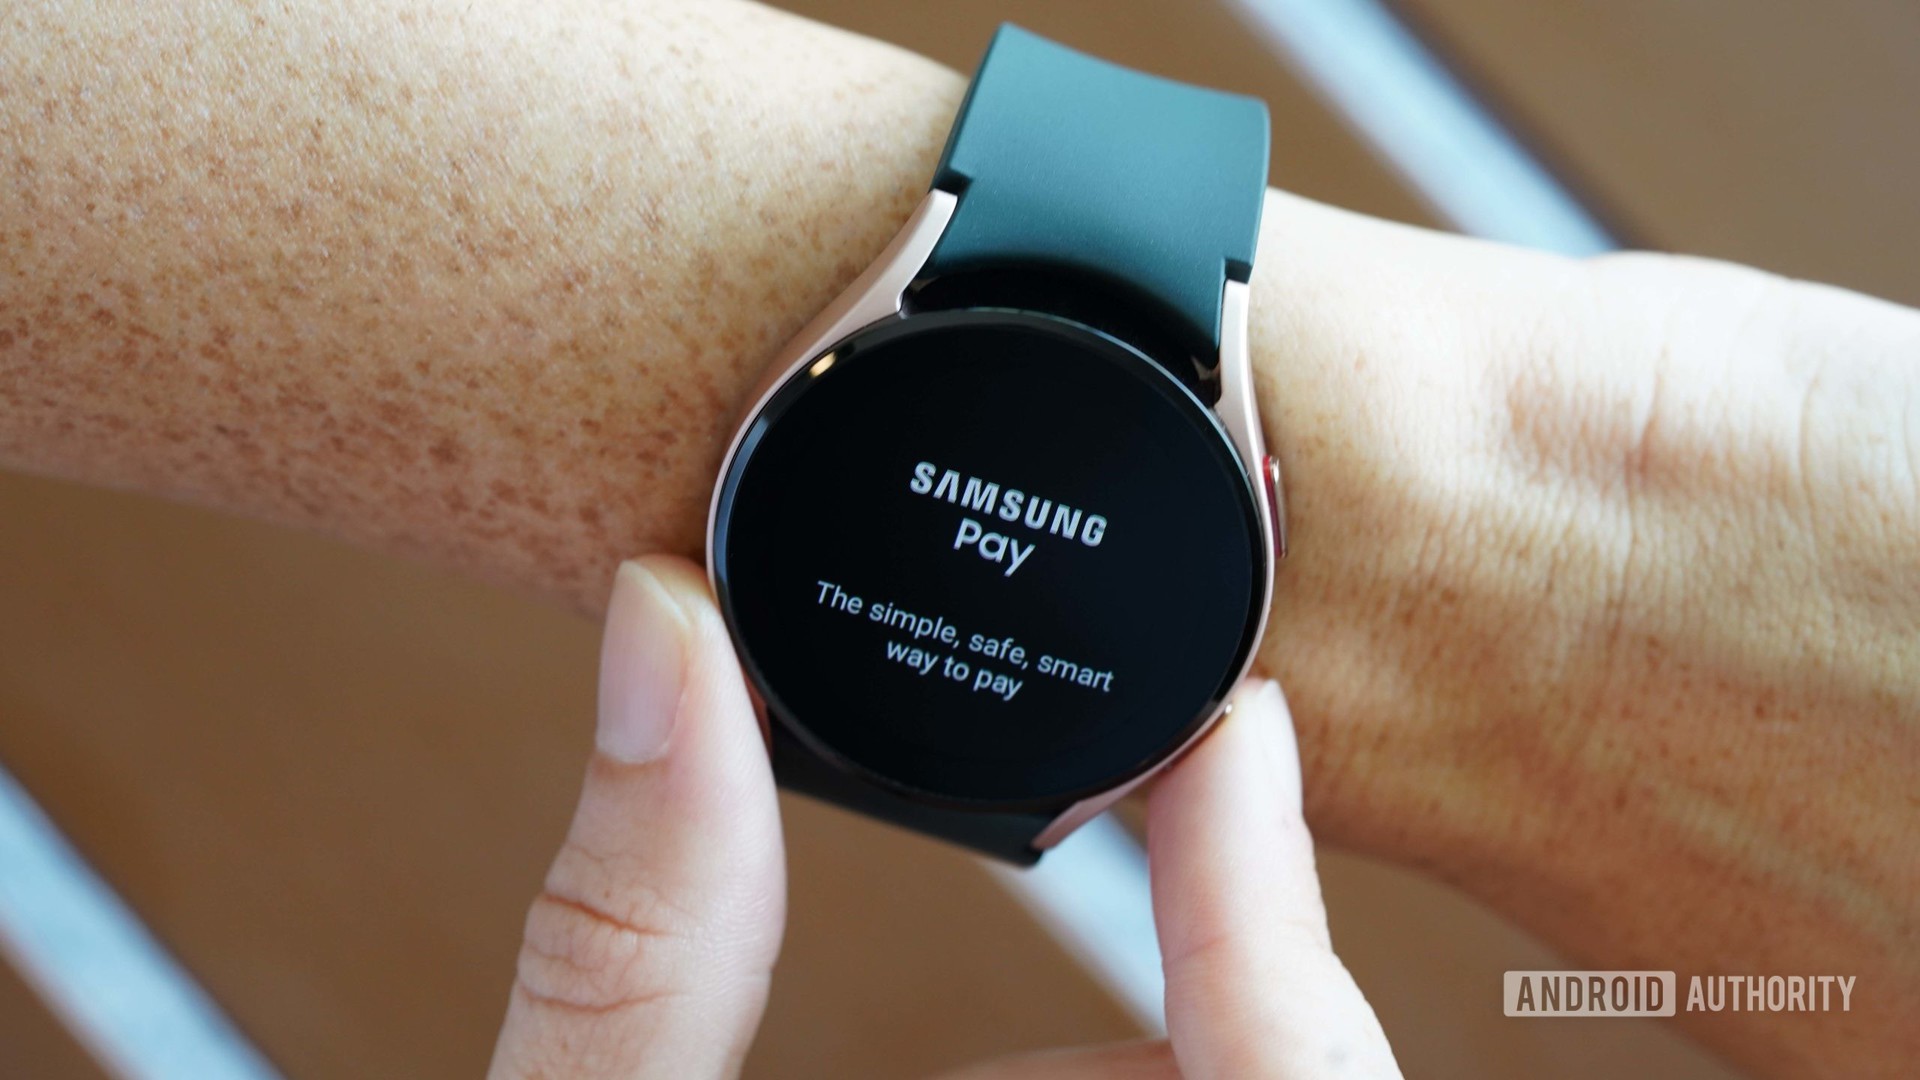 A galaxy watch 4 displays samsung pay, one of the digital payment options on the device.